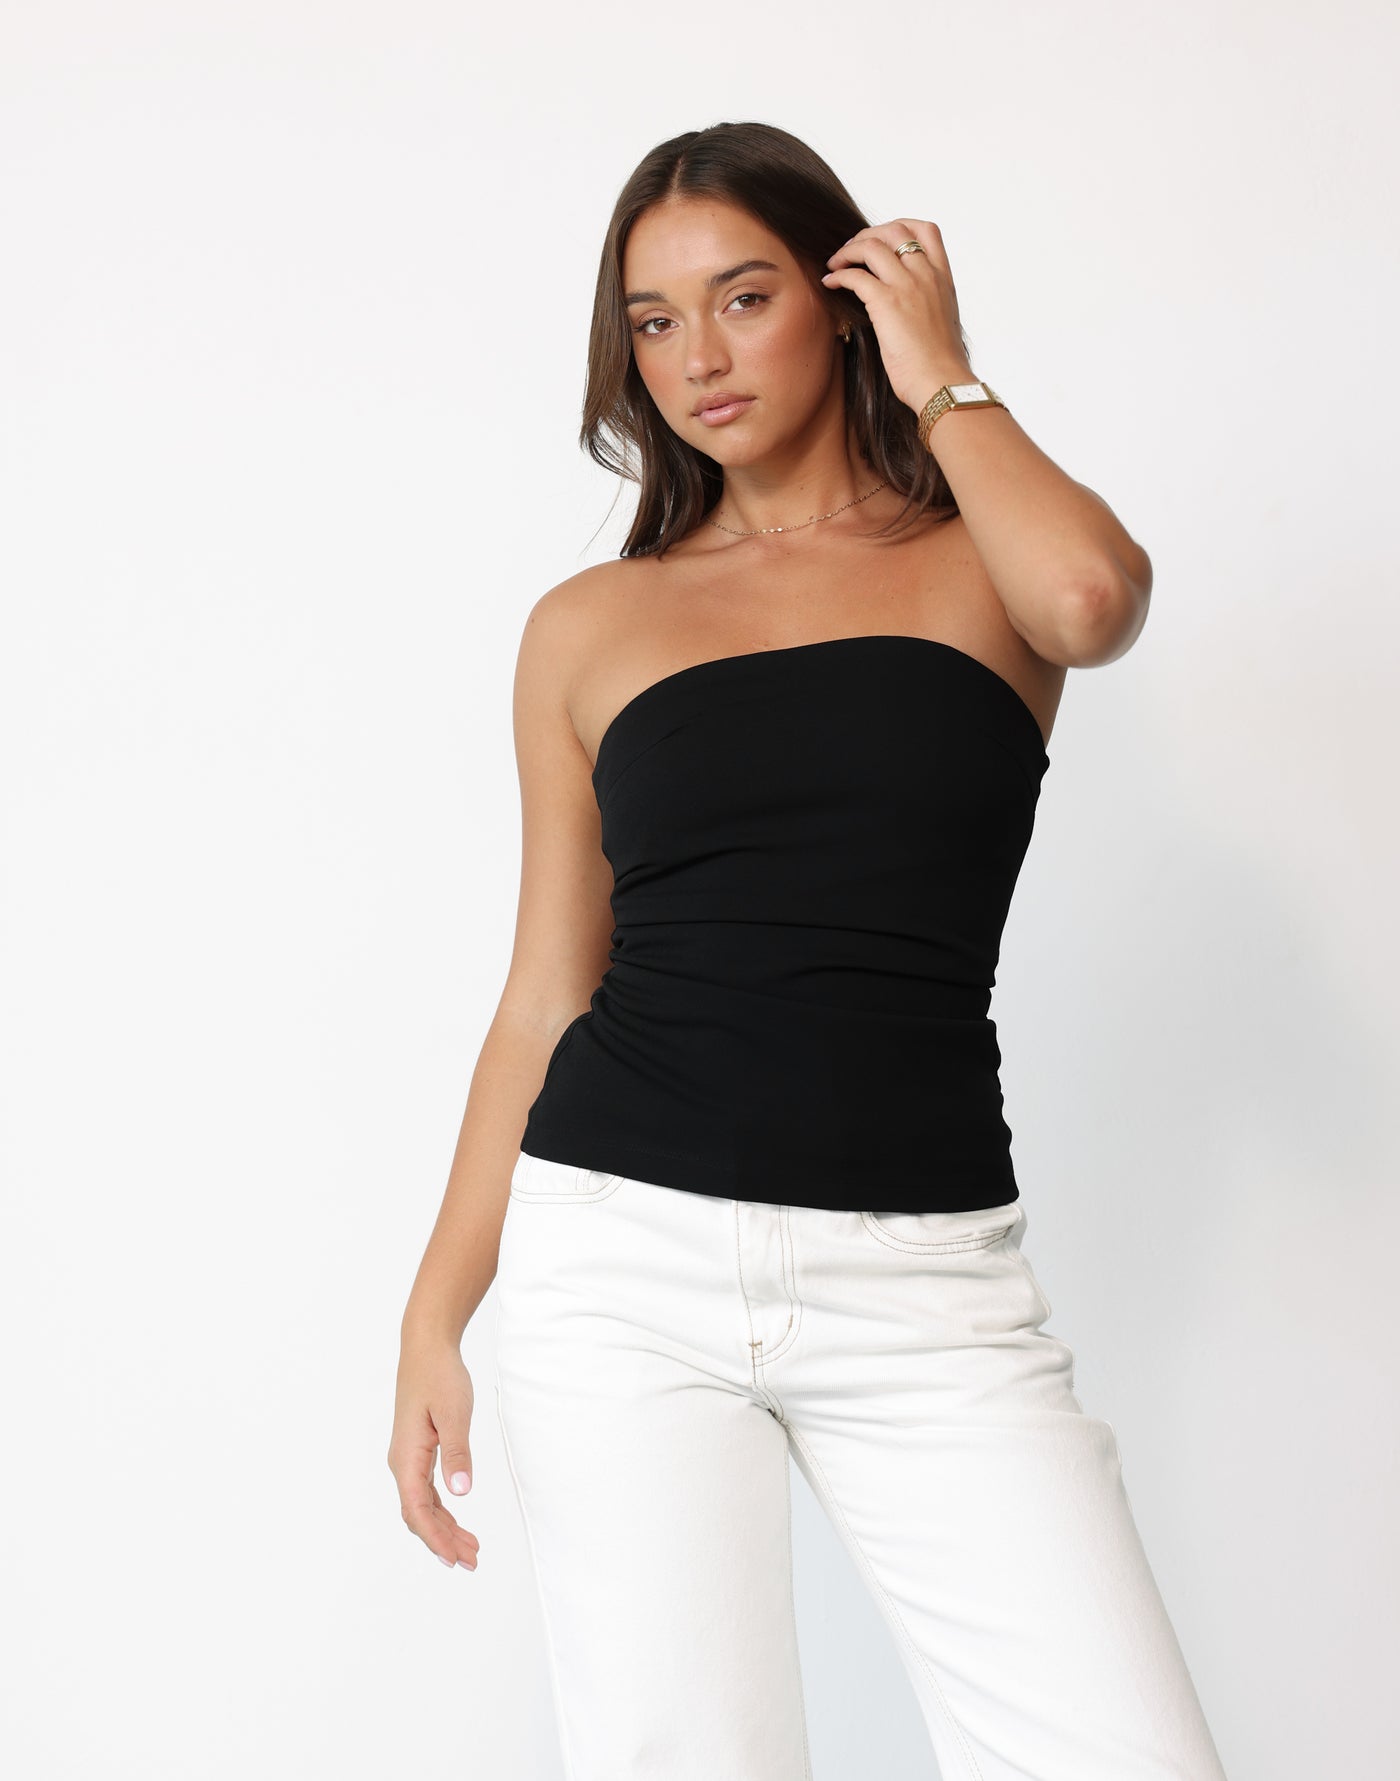 Reverie Top (Black) - Strapless Tube Style Longline Top - Women's Top - Charcoal Clothing